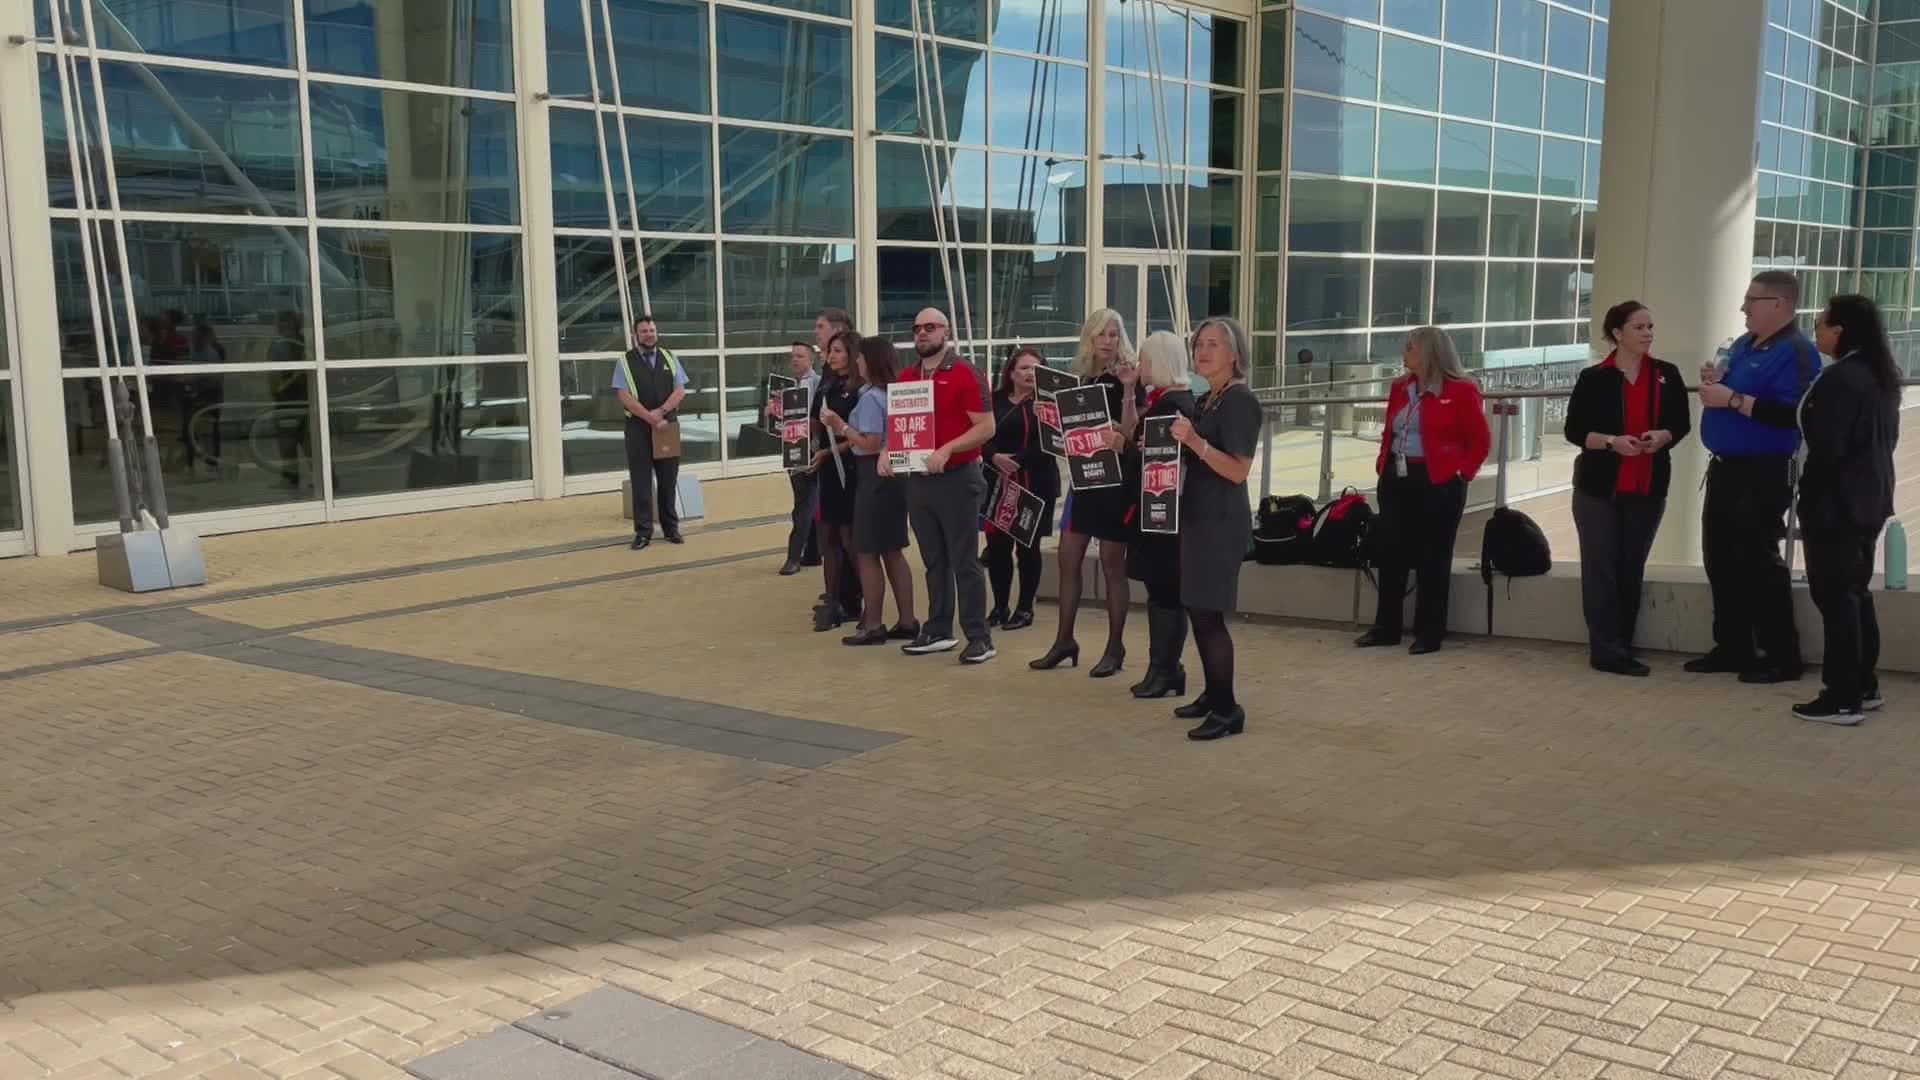 A group of flight attendants is taking a stand at Denver international airport joining with thousands of others across the country to picket against work conditions.